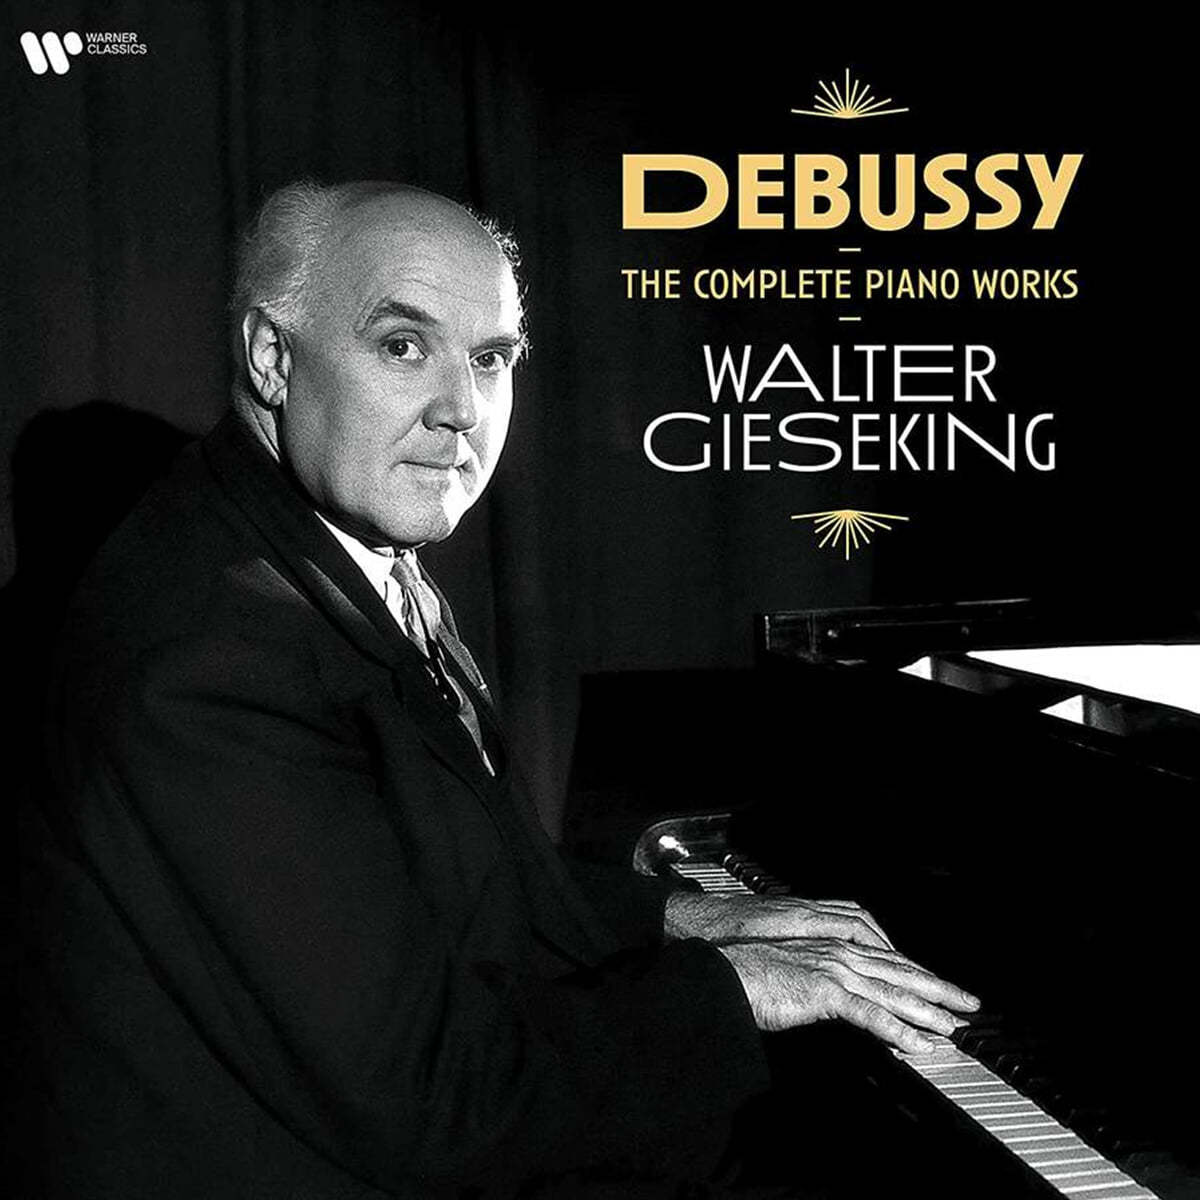 Walter Gieseking 드뷔시: 피아노 작품 전집 - 발터 기제킹 (Debussy: The Complete Piano Works) [5LP]